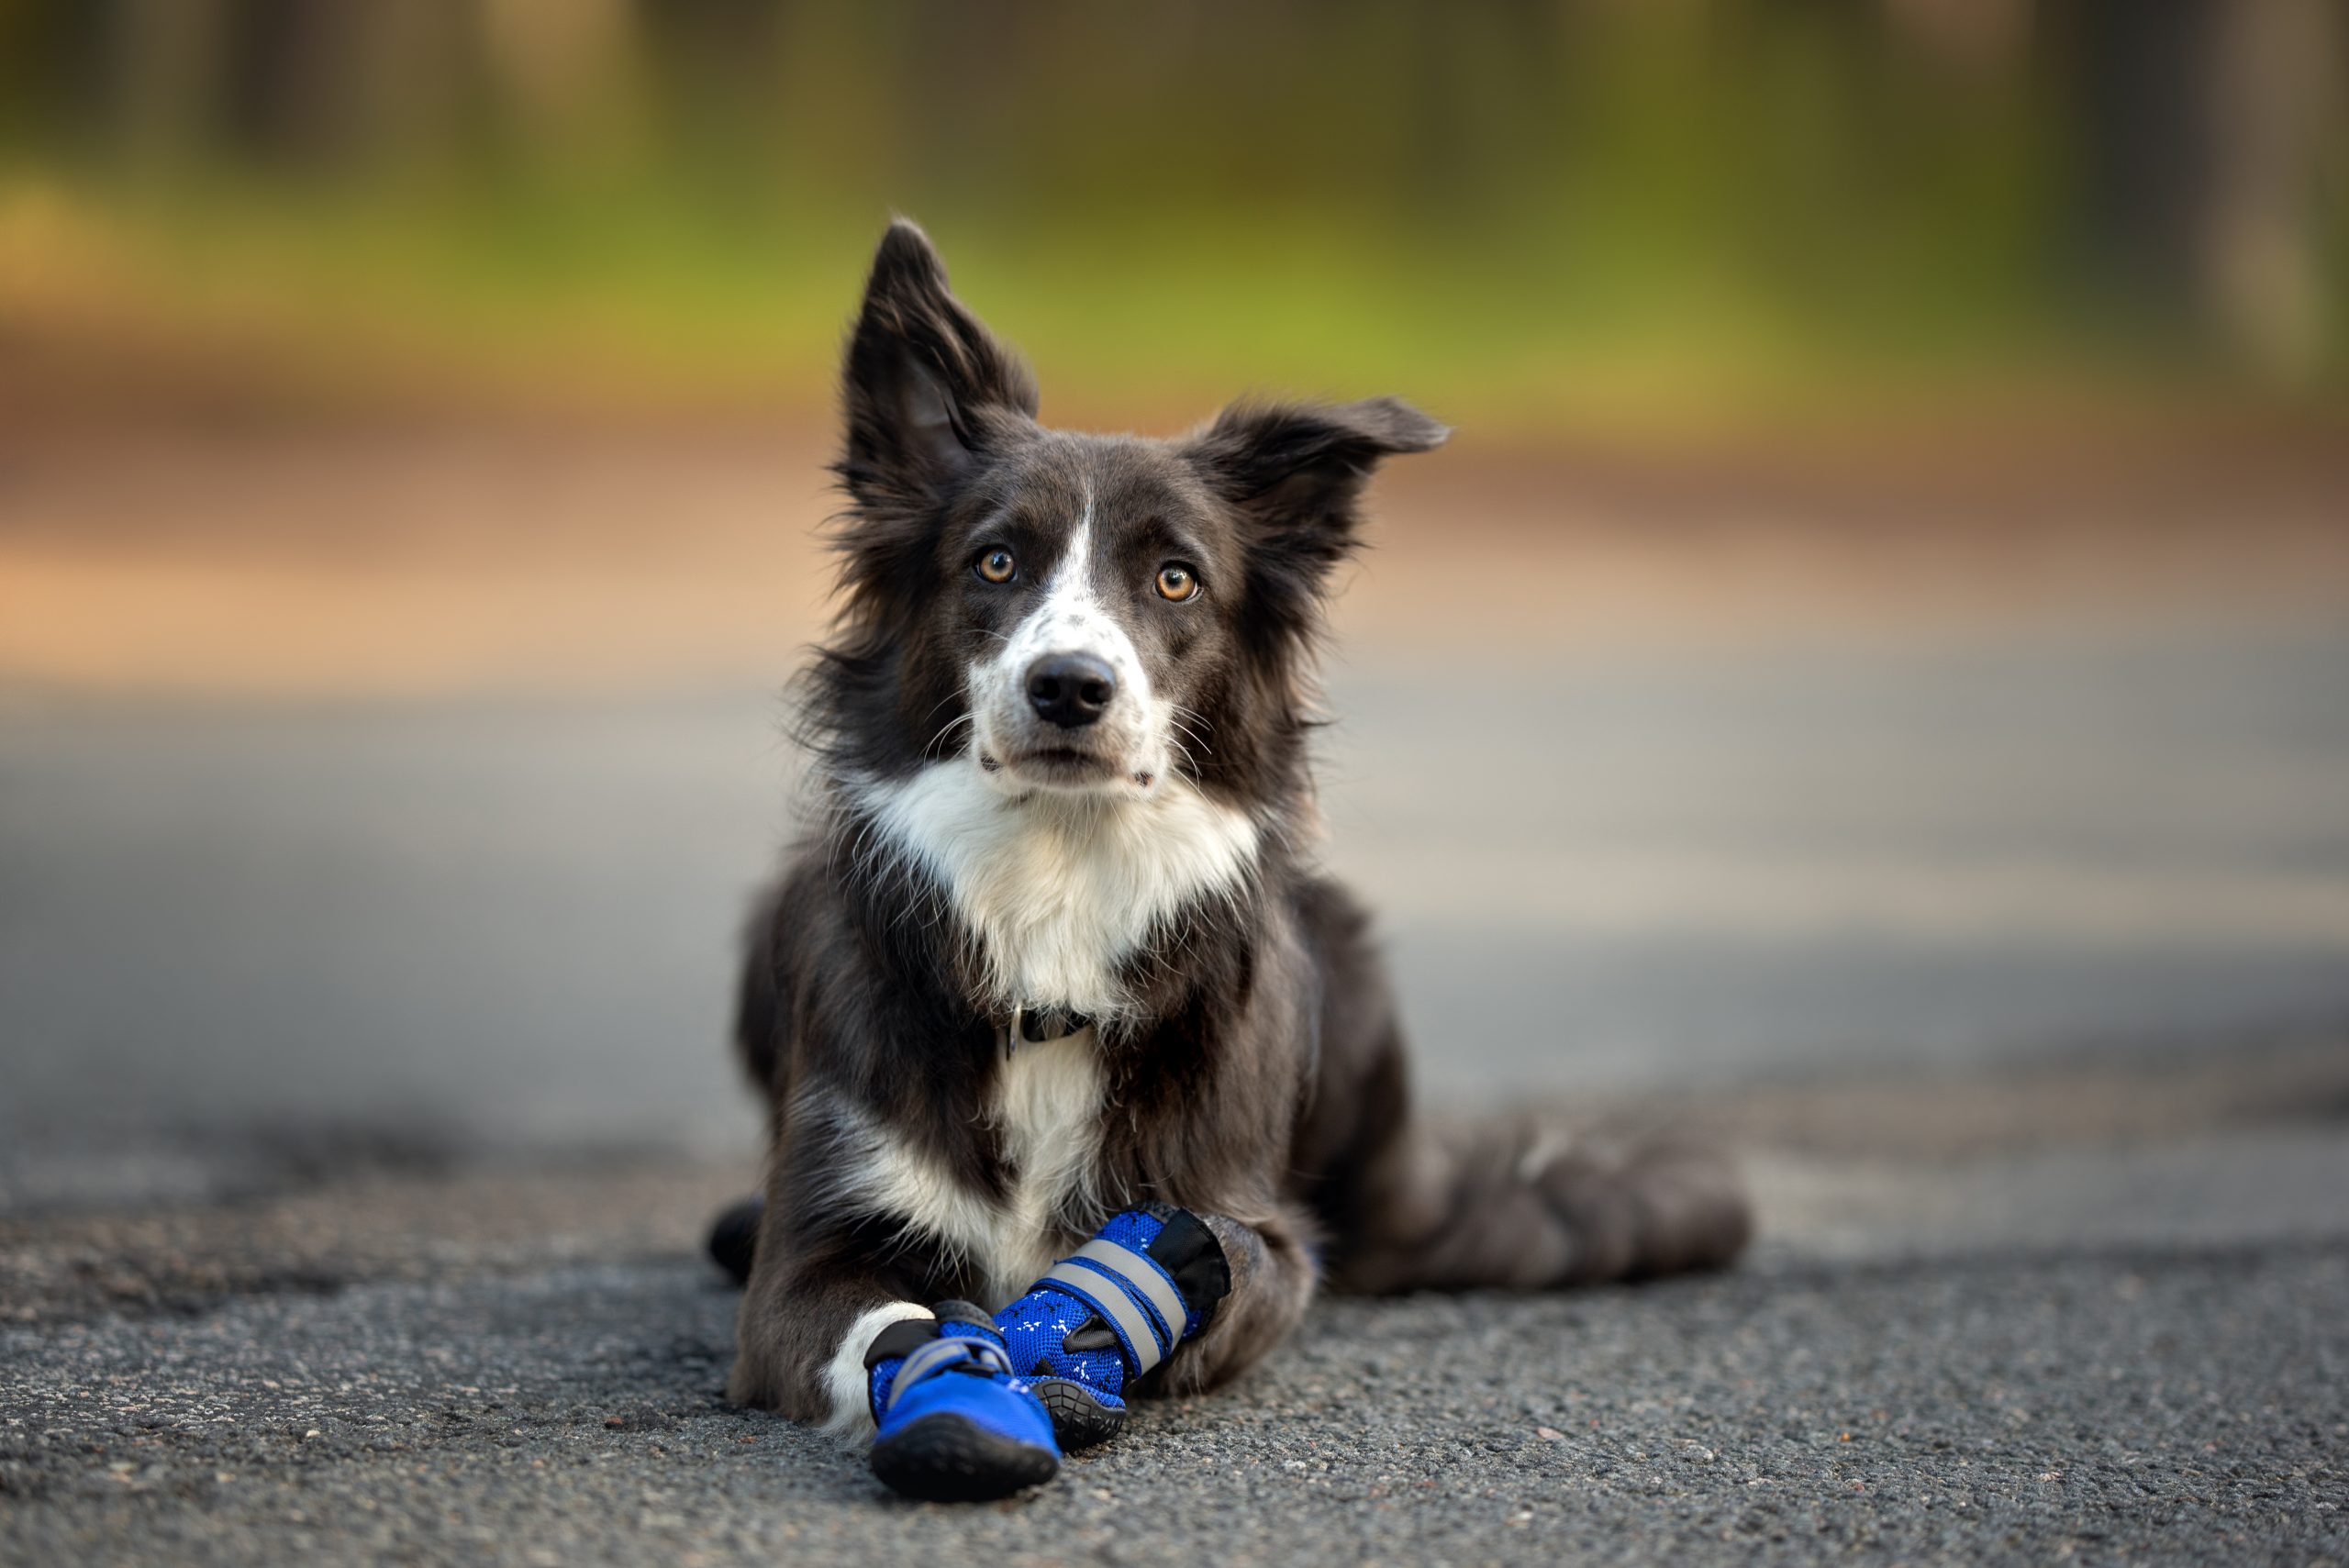 How to Make Dog Booties Out of Socks